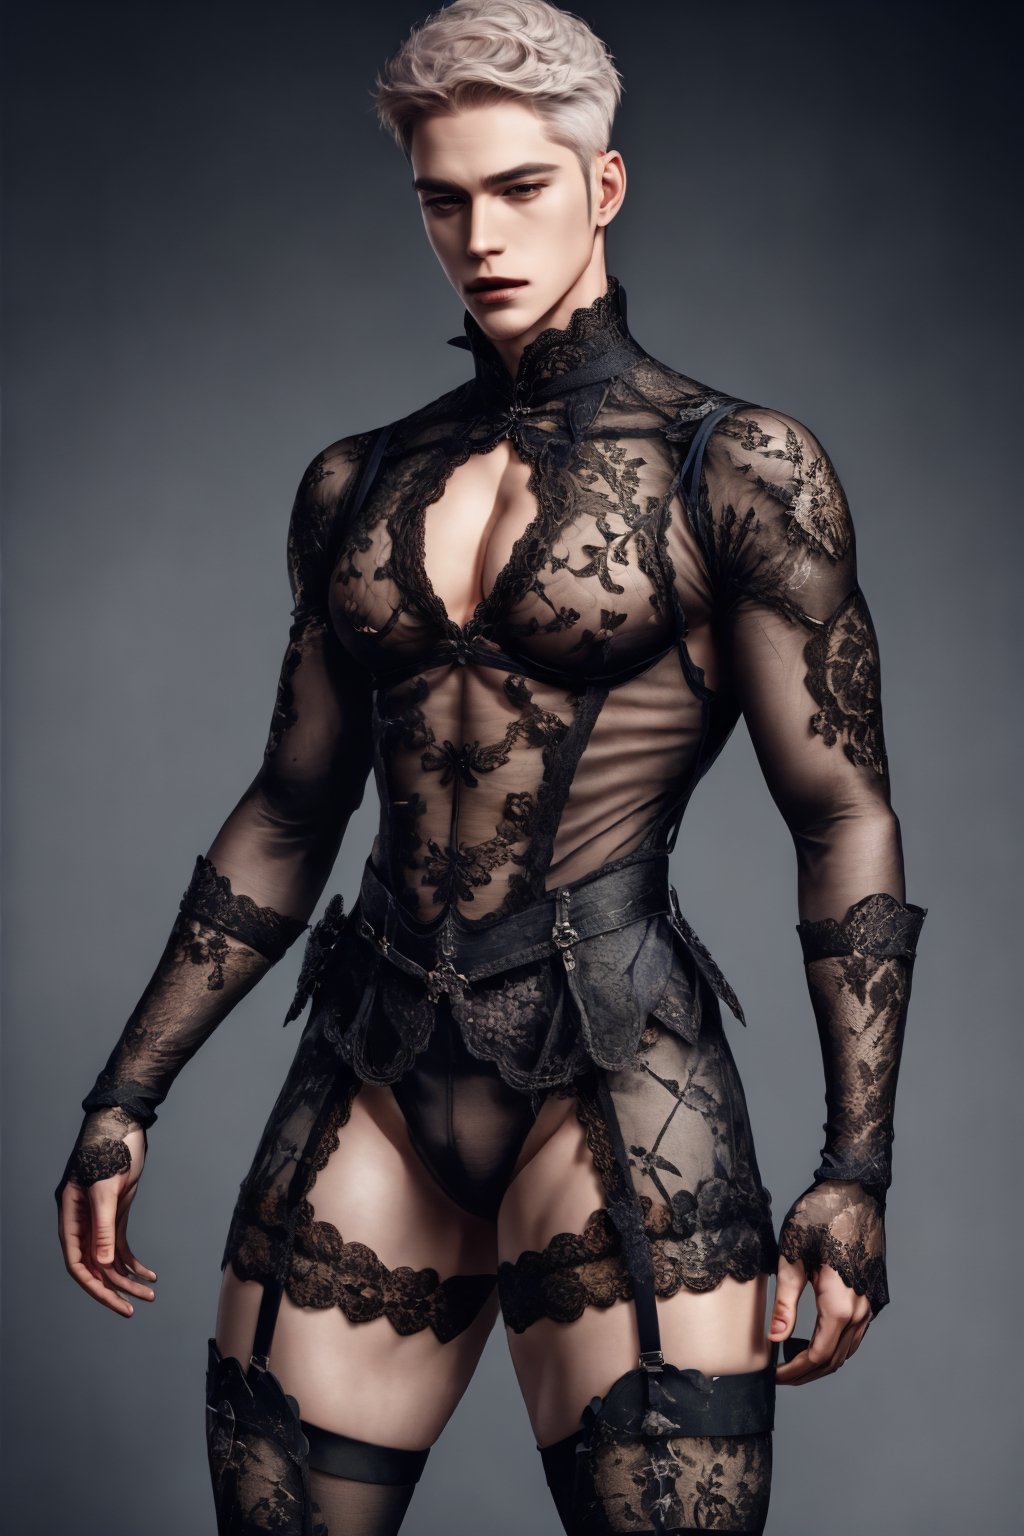 1male, lace_top, lace_stockings, lace_gloves, lace_thigh_high_boots, pale_skin, handsome, korean, 8k resolution, ultra detailed, pecs, cleavage cutout